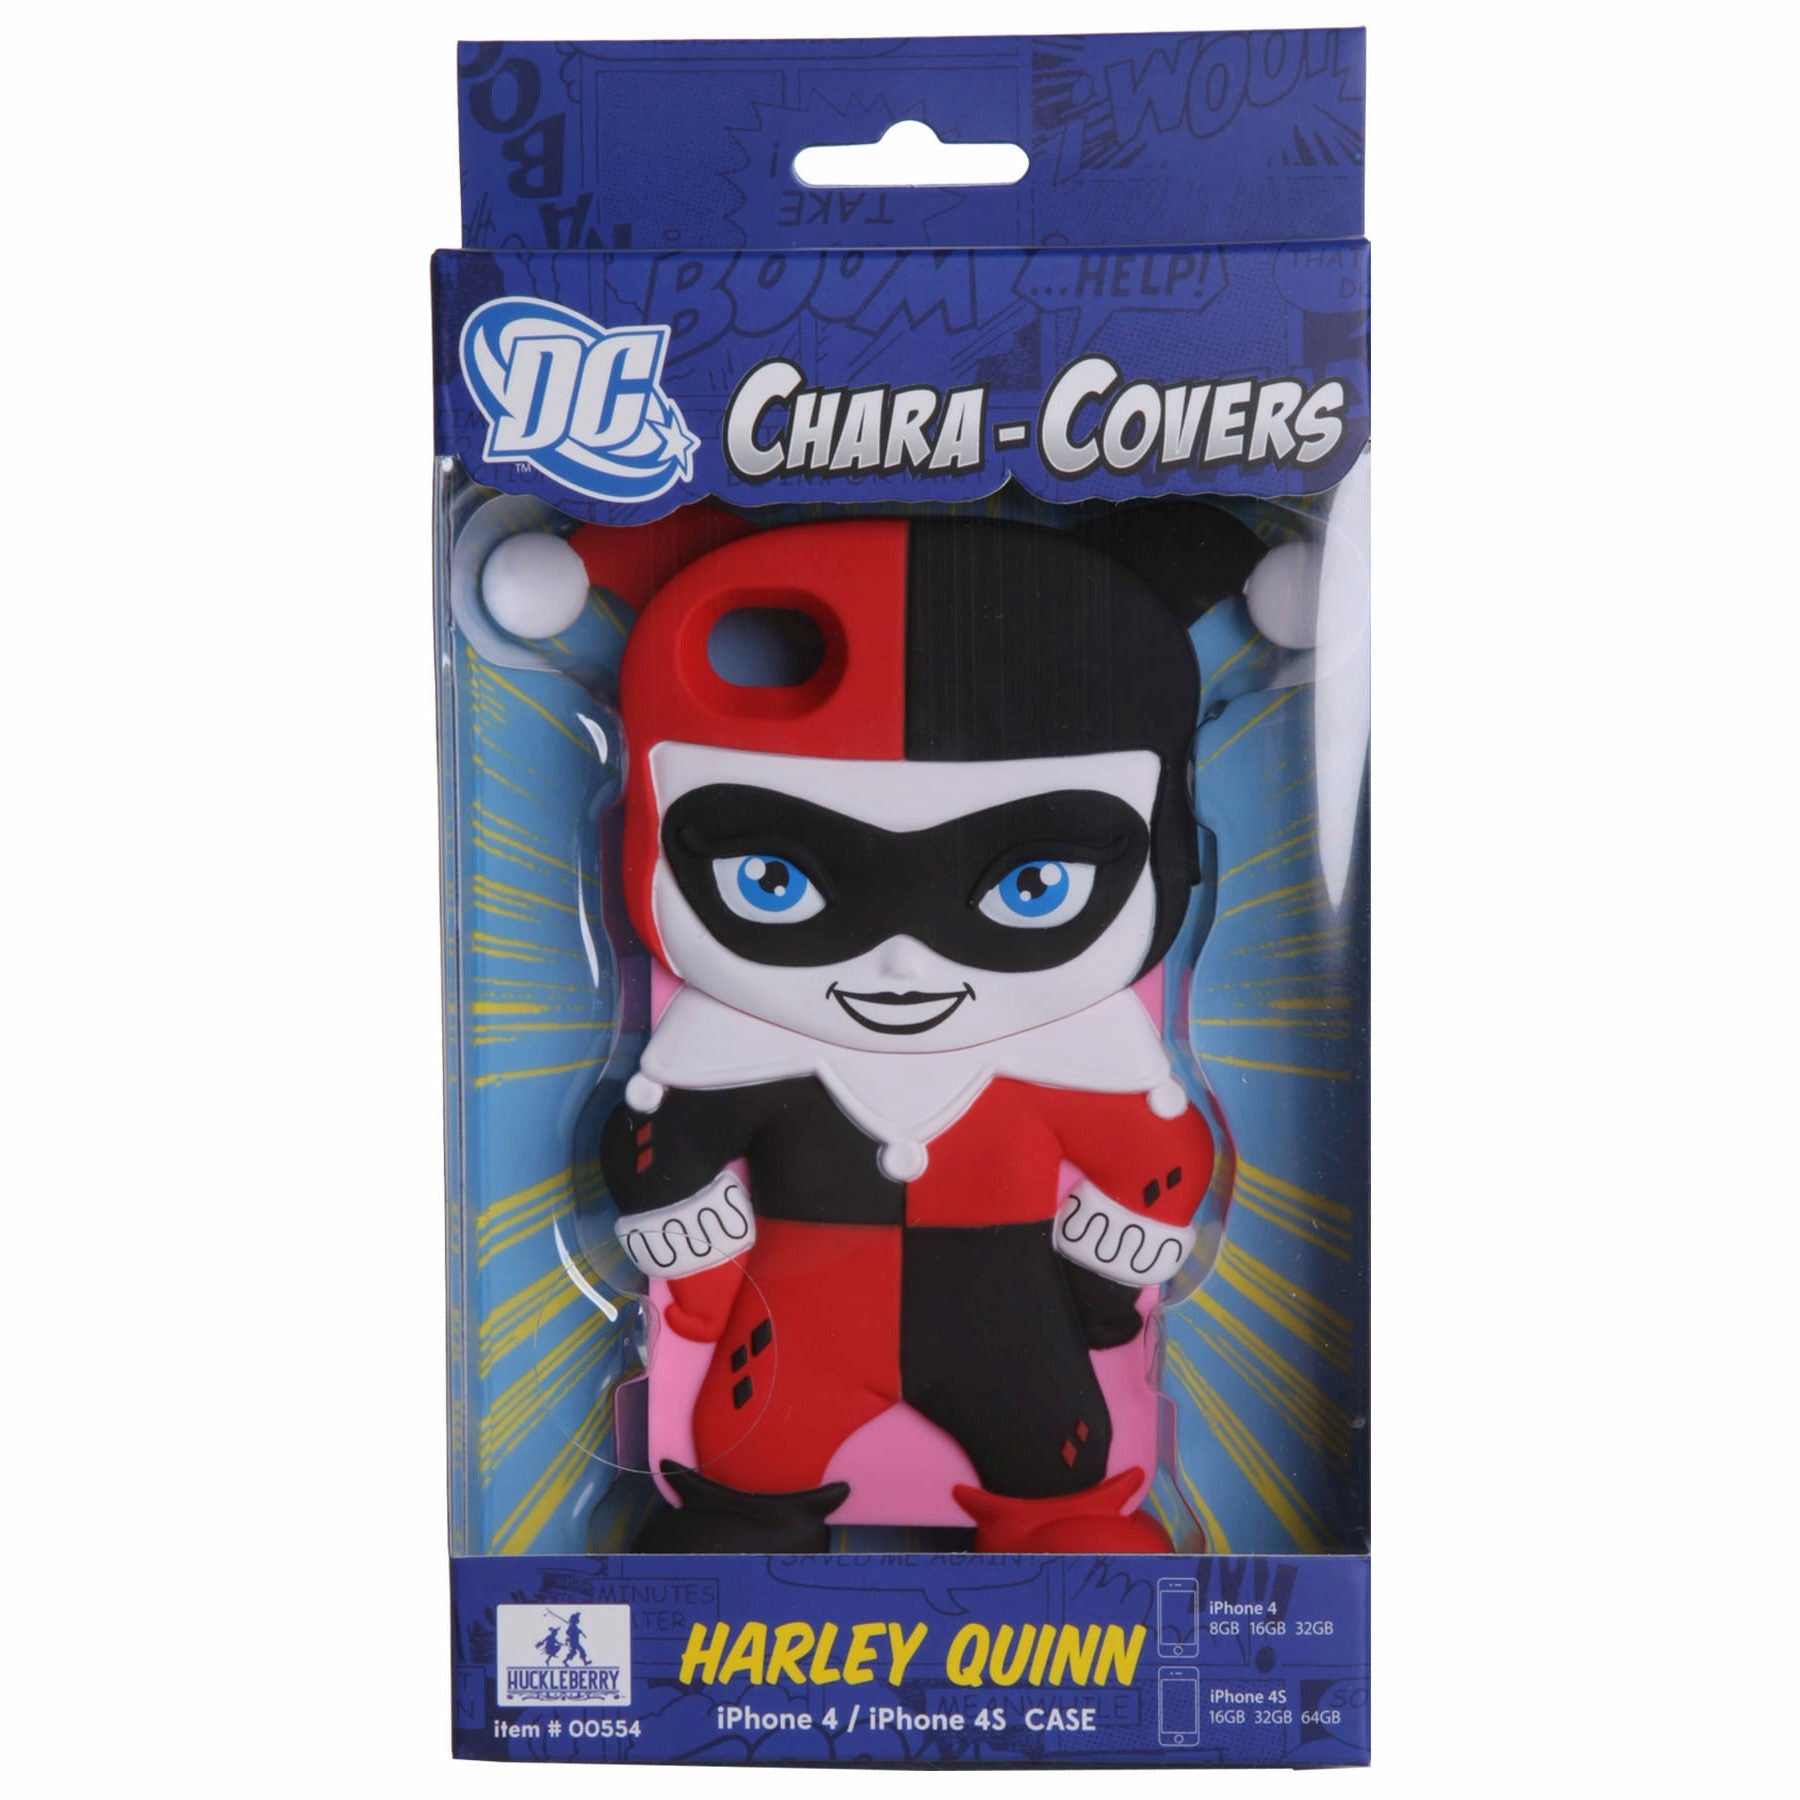 DC Chara-Covers Harley Quinn Iphone 4/4s Case